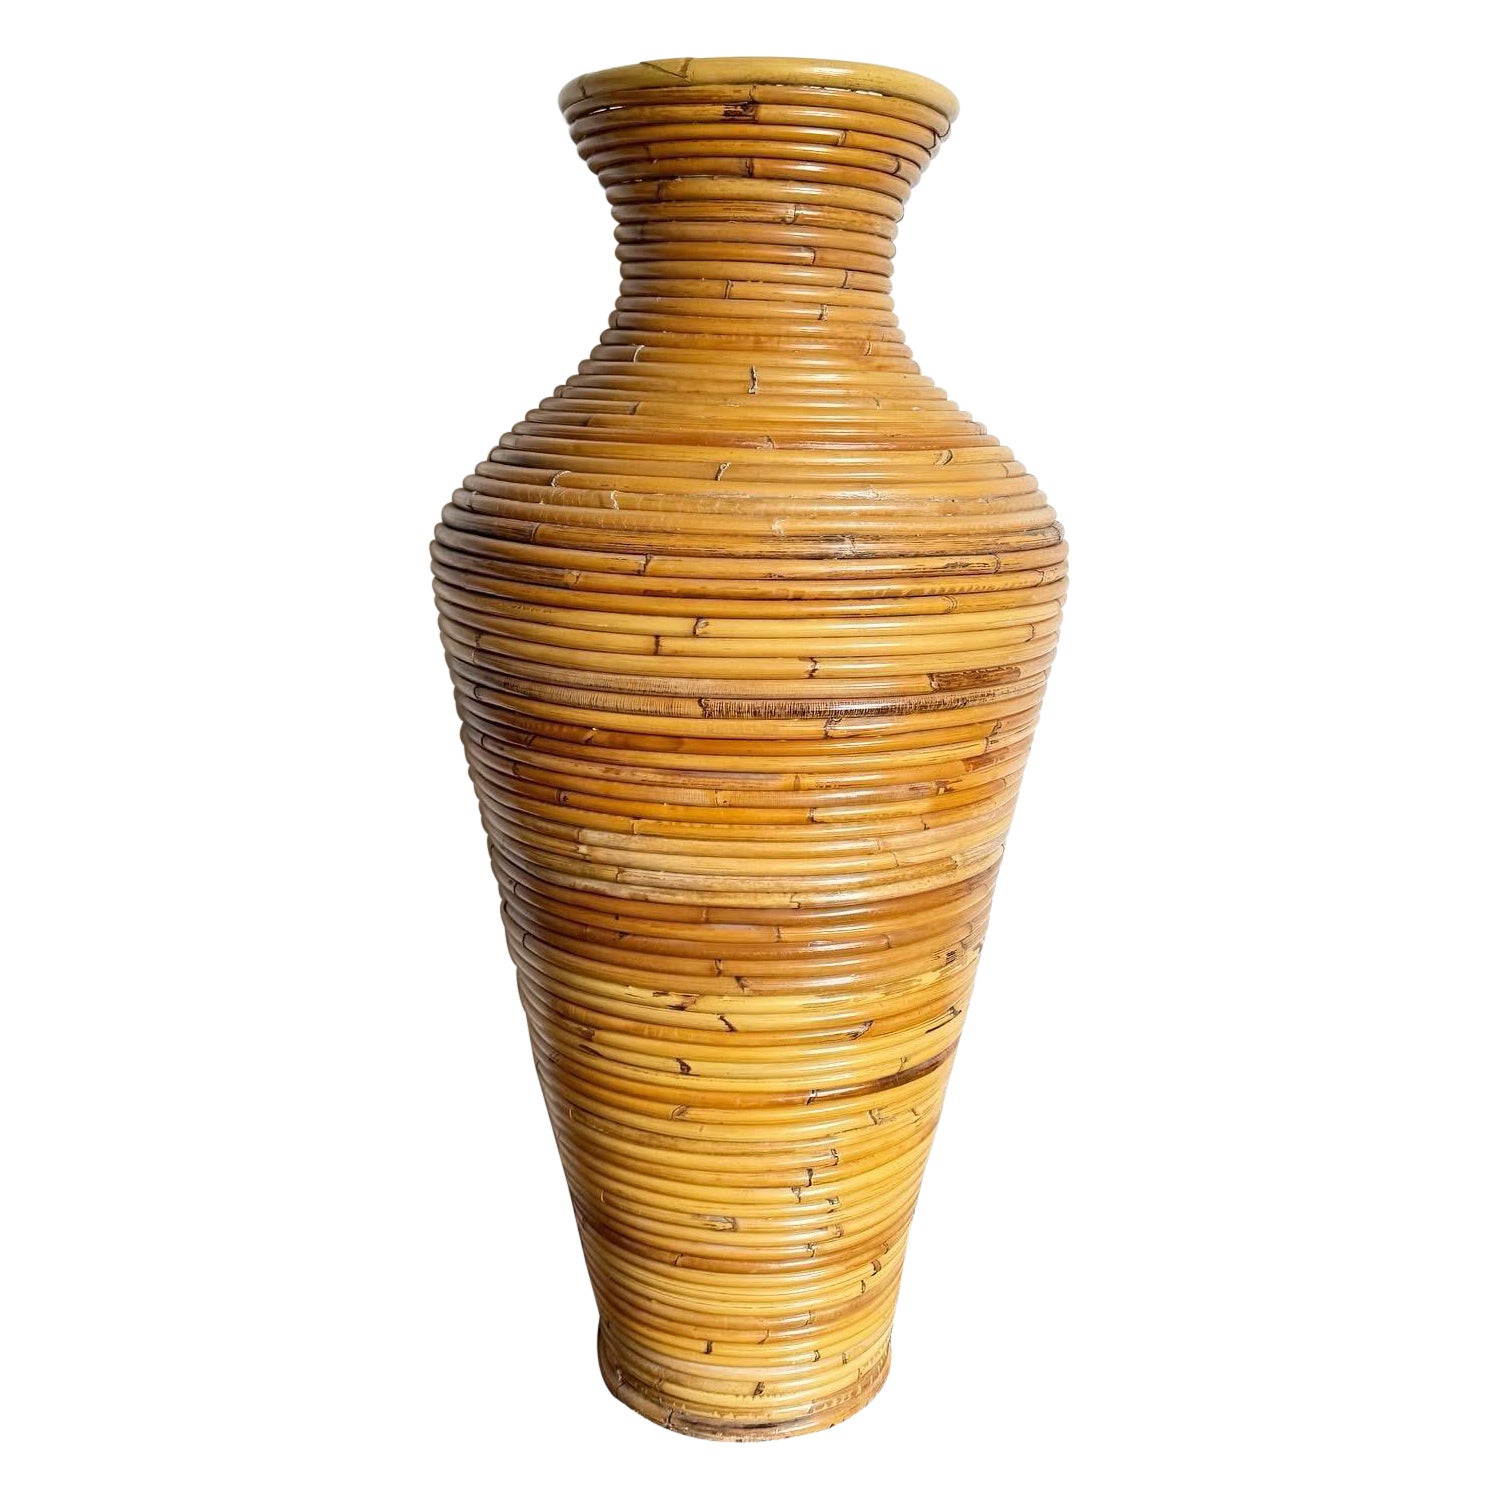 Boho Chic Pencil Reed Floor Vase For Sale